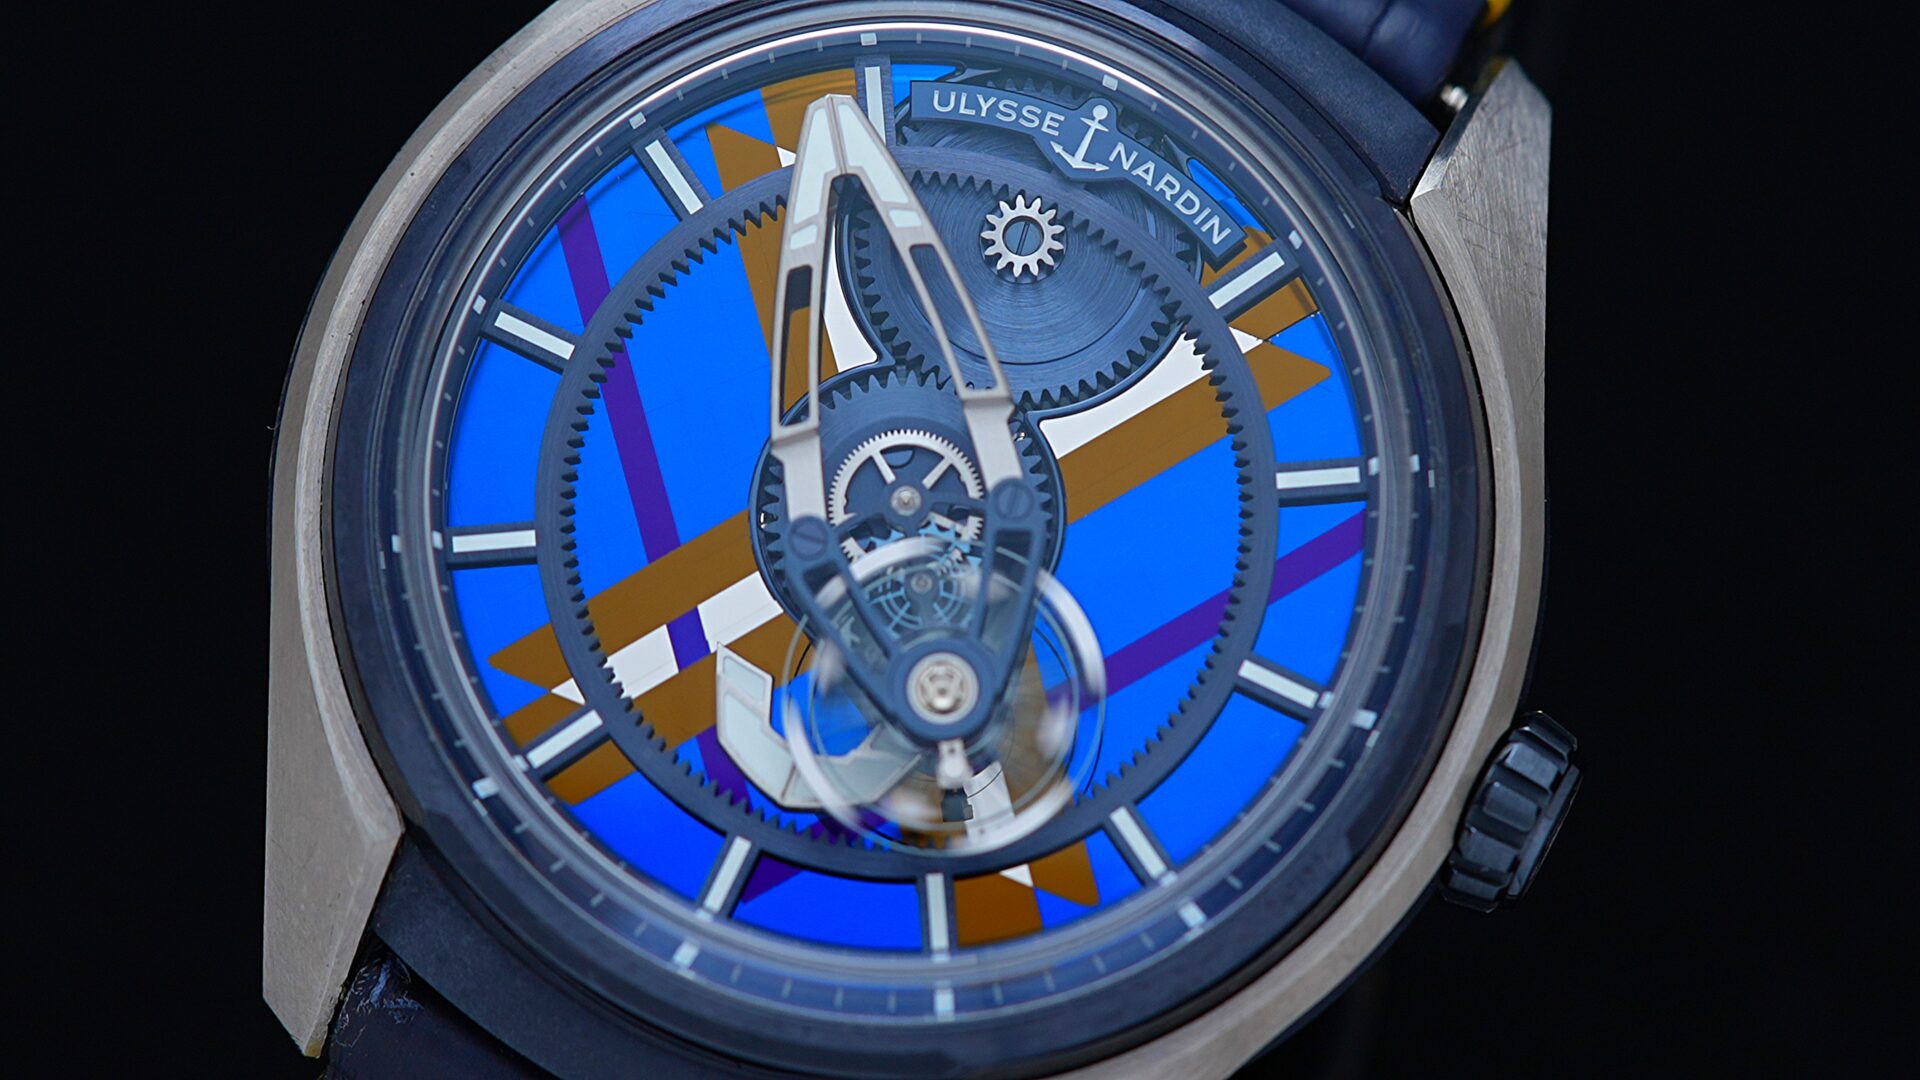 Vibrant dial on the Ulysse Nardin Freak X Marquetry watch.